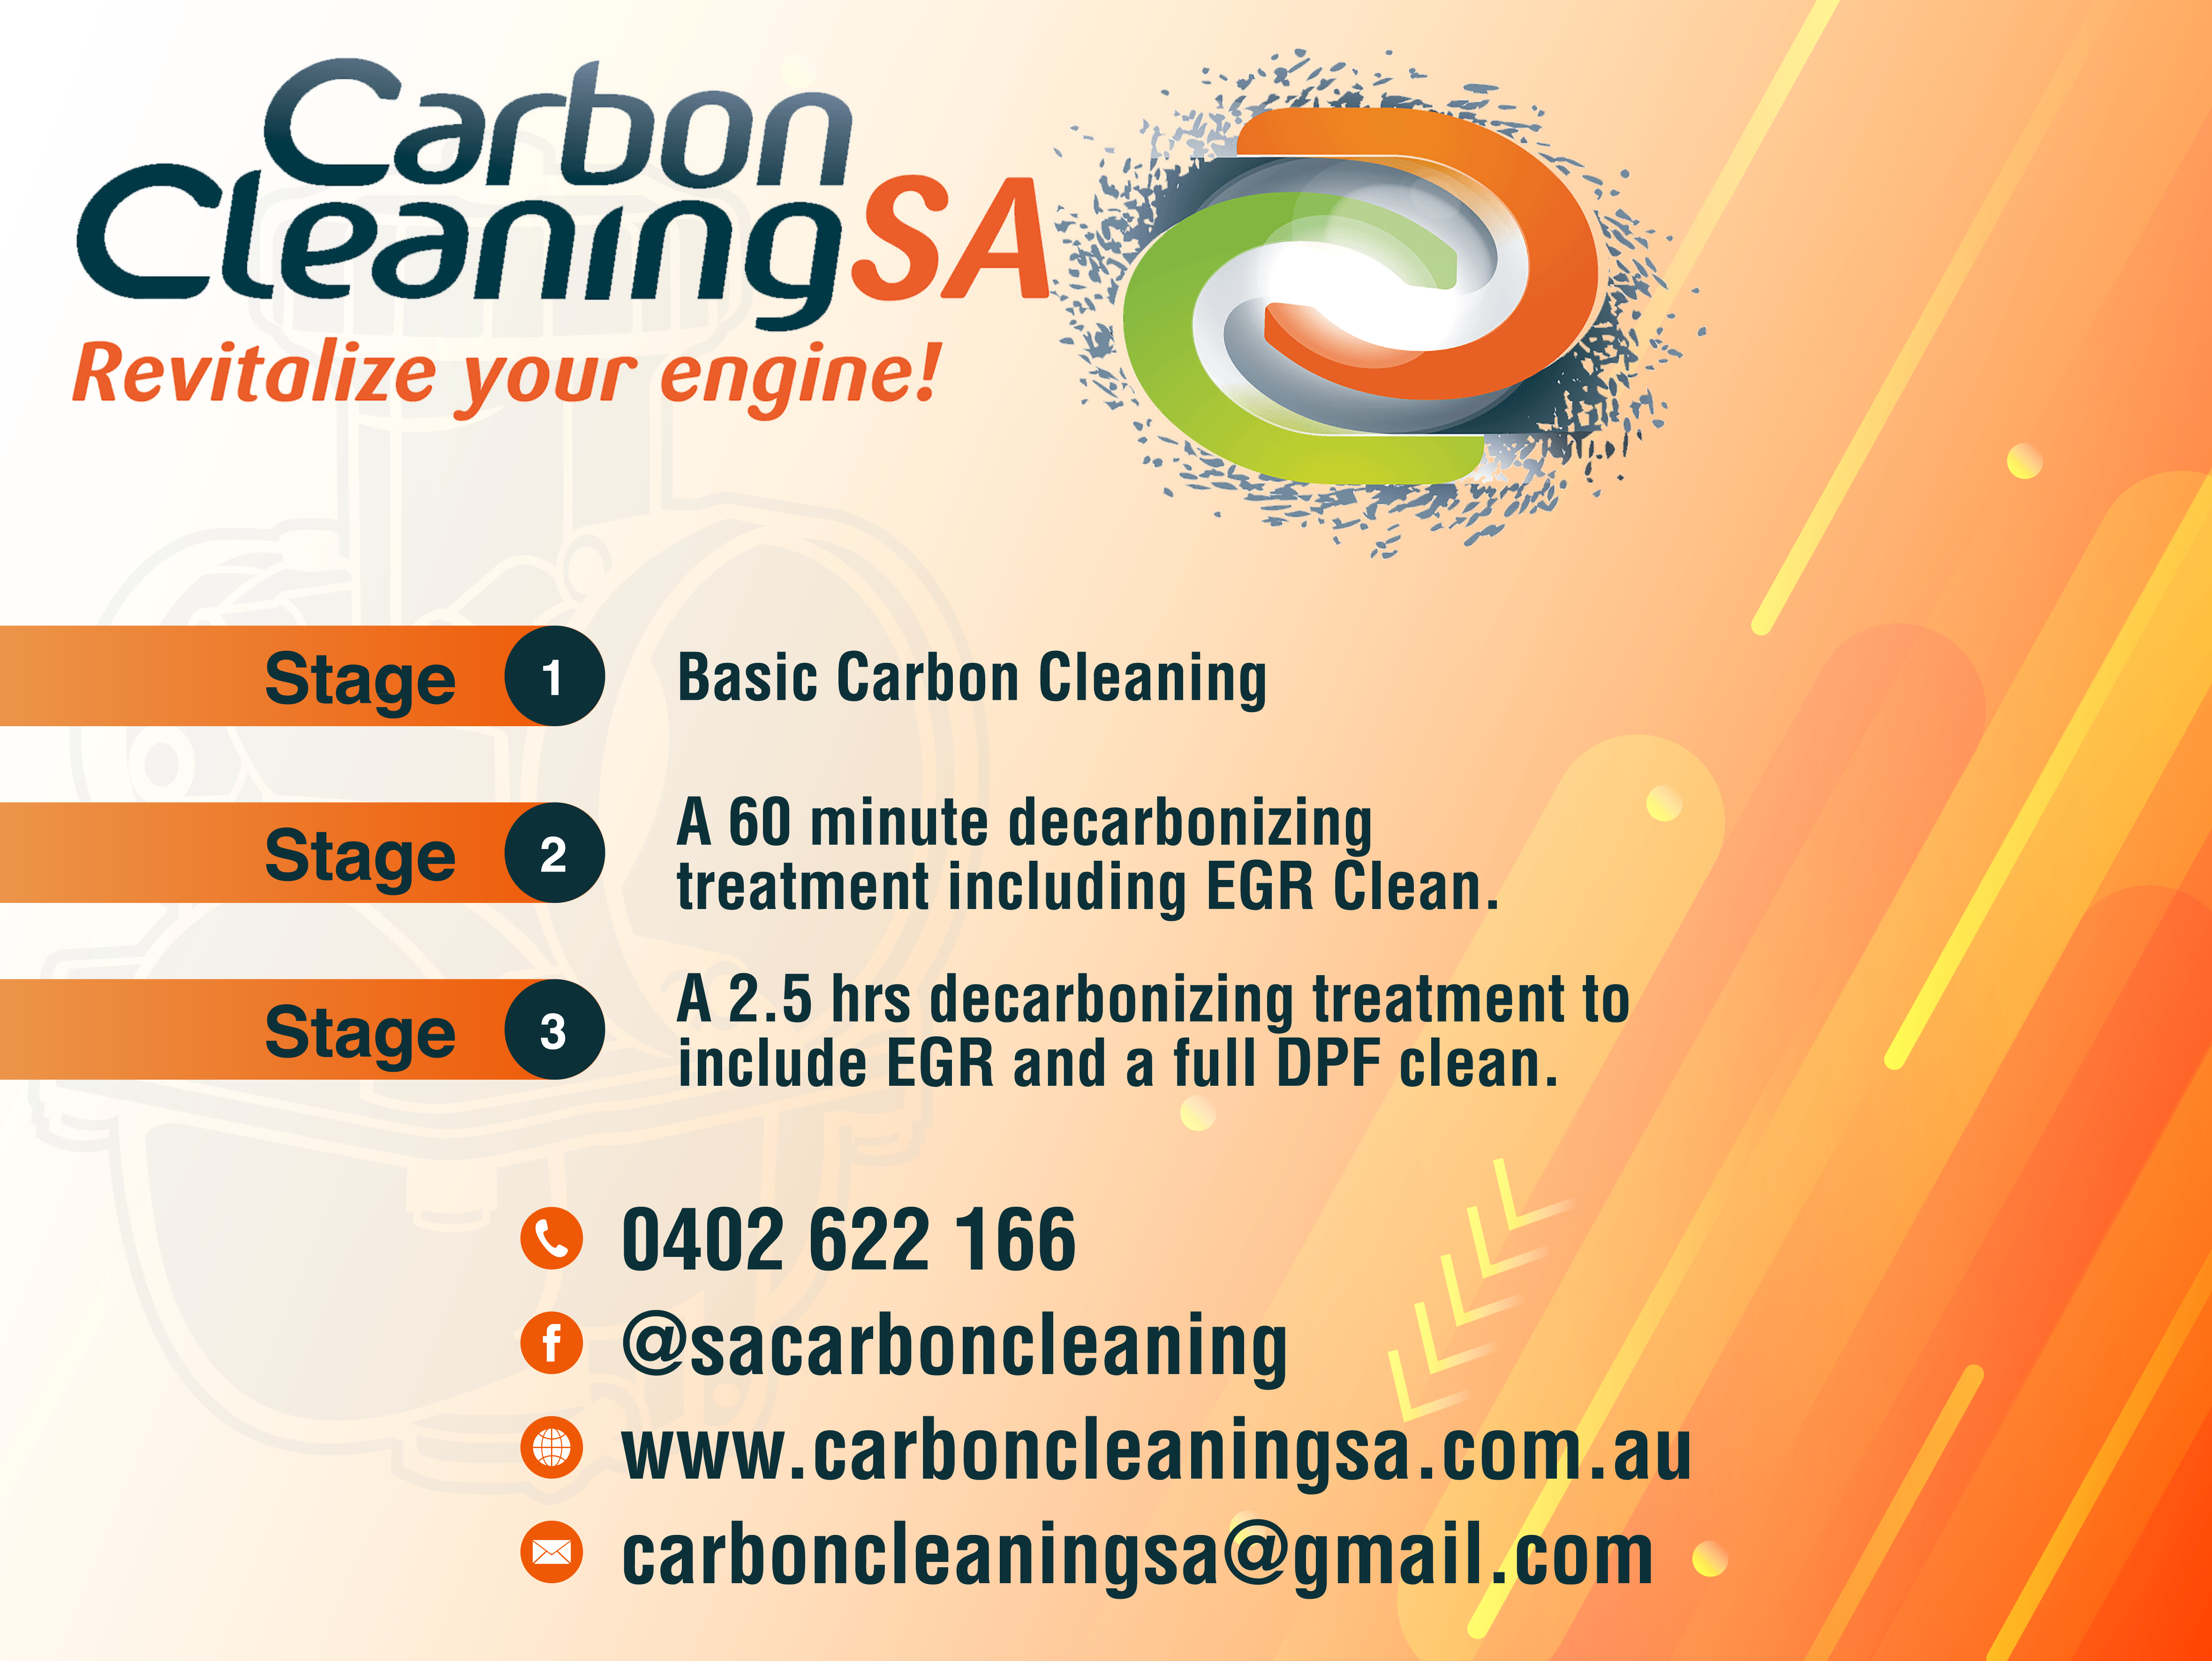 Carbon Cleaning SA